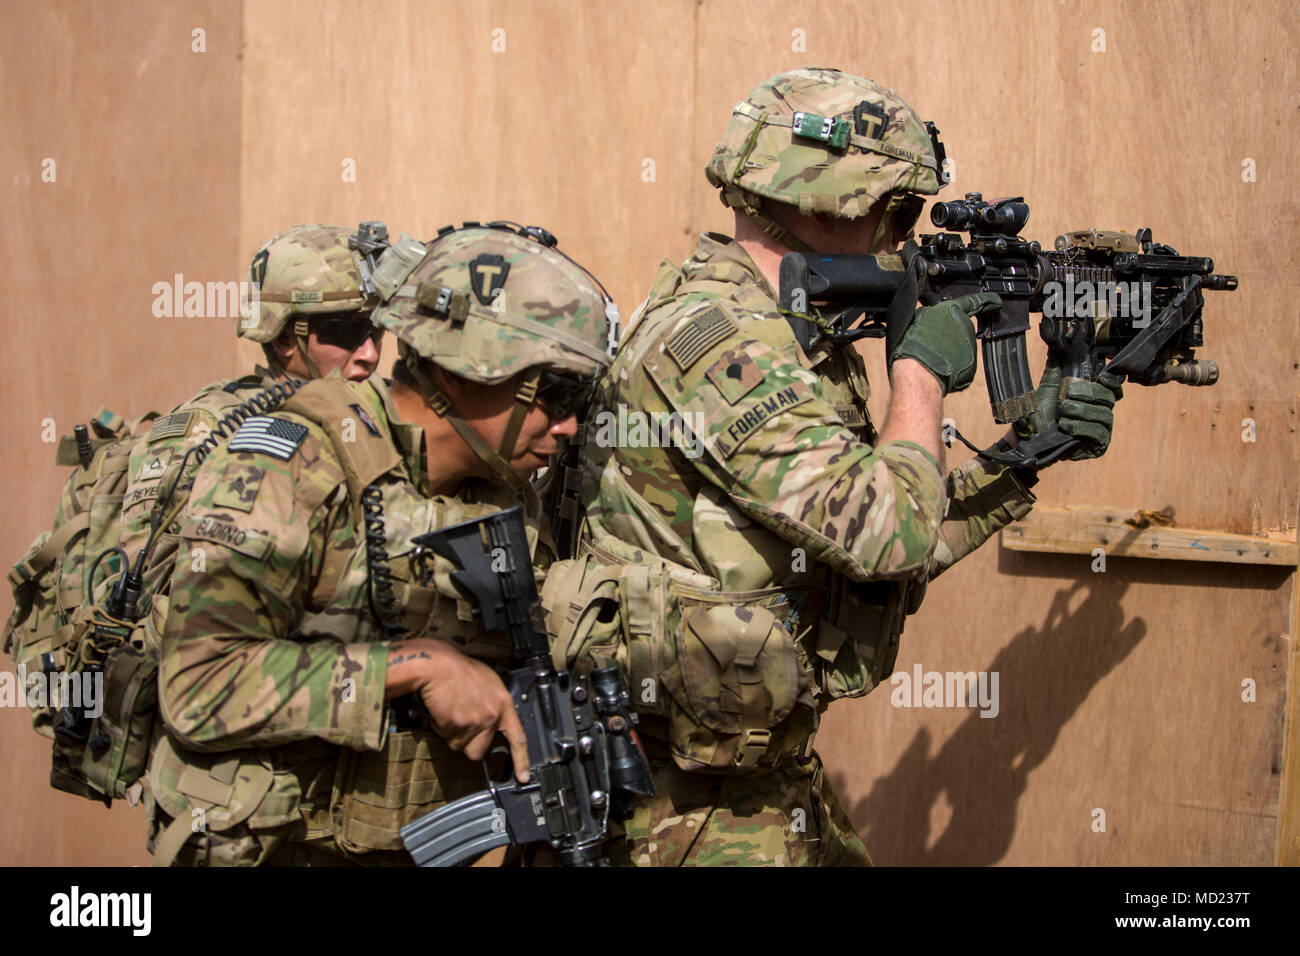 U.S. Soldiers, with 10th Mountain Division, conduct room clearing drills during a live fire readiness exercise at Camp Taji, Iraq, March 8, 2018. The 10th Mountain Division, deployed to Iraq as part of Operation Inherent Resolve, is dedicated to defeating ISIS in Iraq and restoring stability and security for the Iraqi people. (U.S. Army photo by Spc. Audrey Ward) Stock Photo